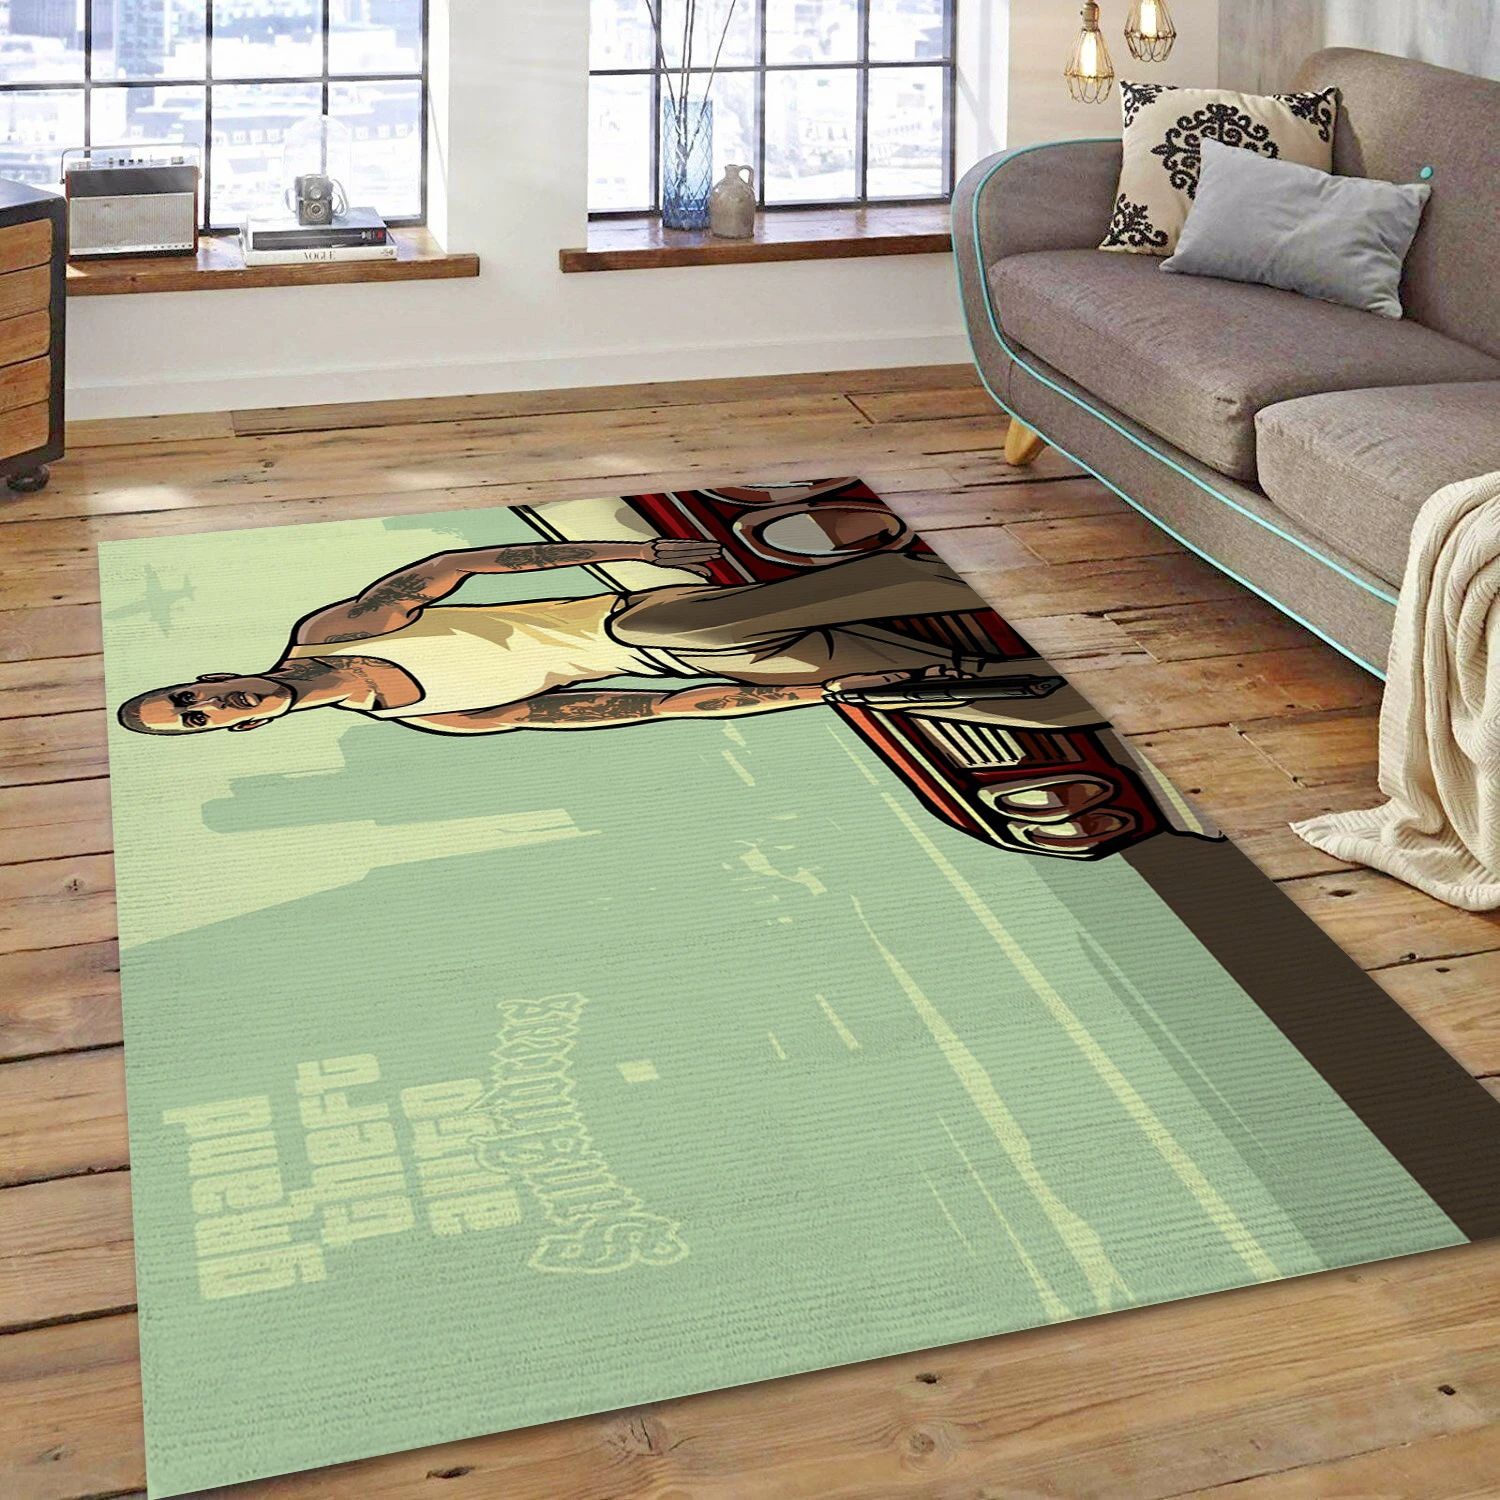 Grand Theft Auto San Andreas Video Game Reangle Rug, Area Rug - Family Gift US Decor - Indoor Outdoor Rugs